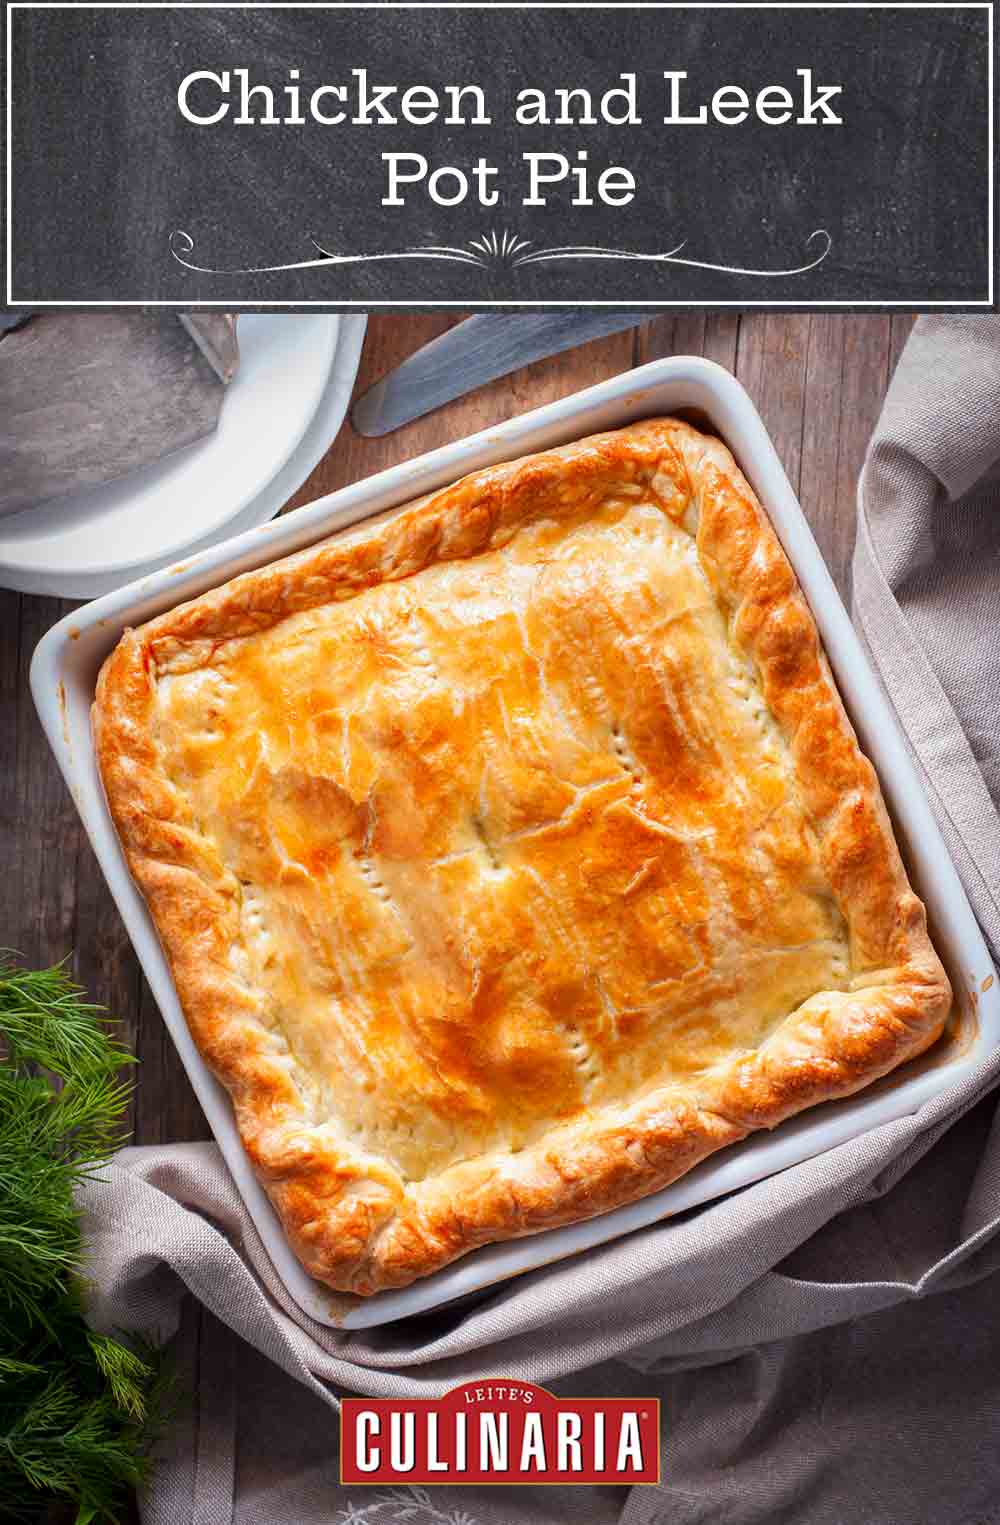 A chicken and leek pot pie in a white square baking dish with a server and forks and knife nearby.